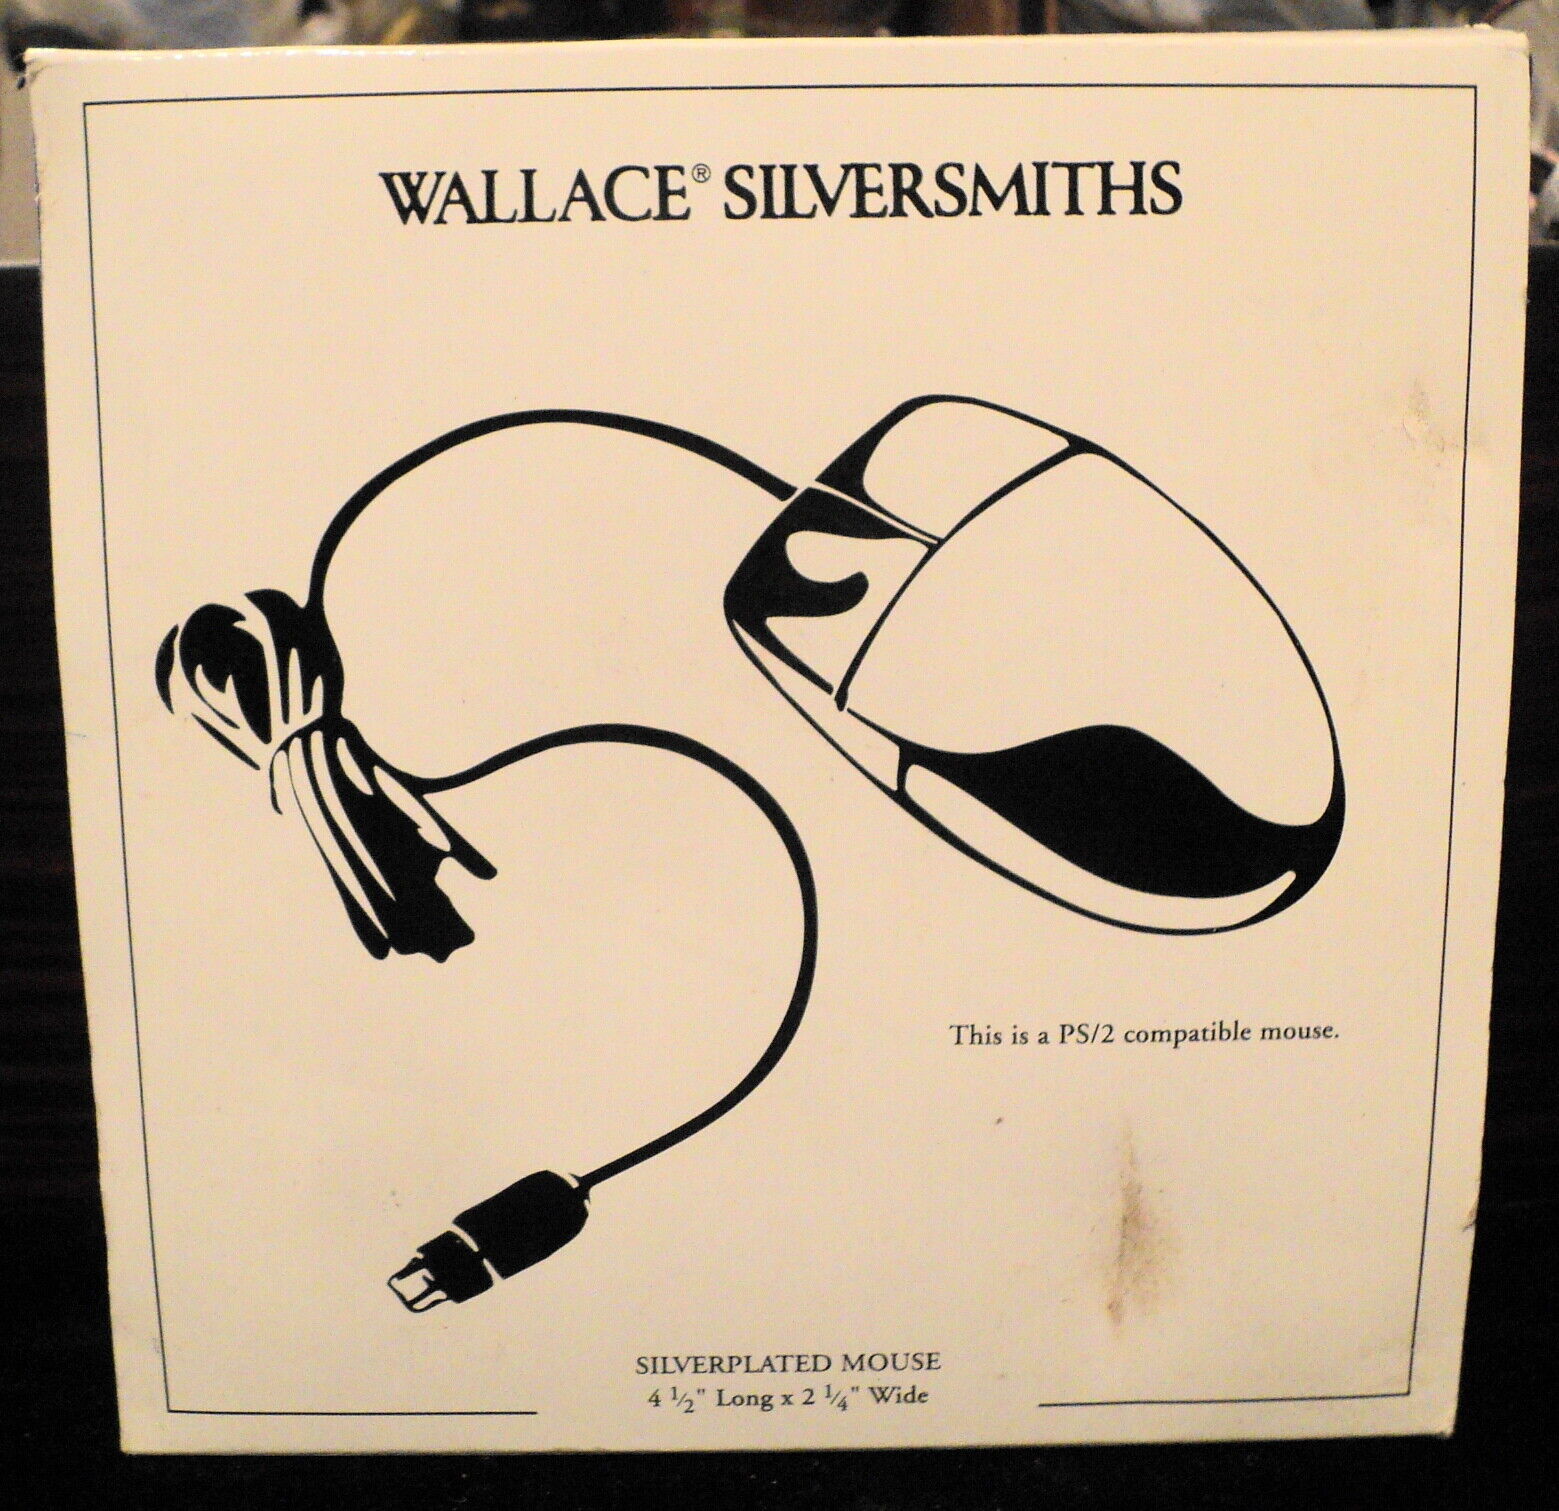 Wallace Silversmiths Silverplated Mouse PS/2 compatible